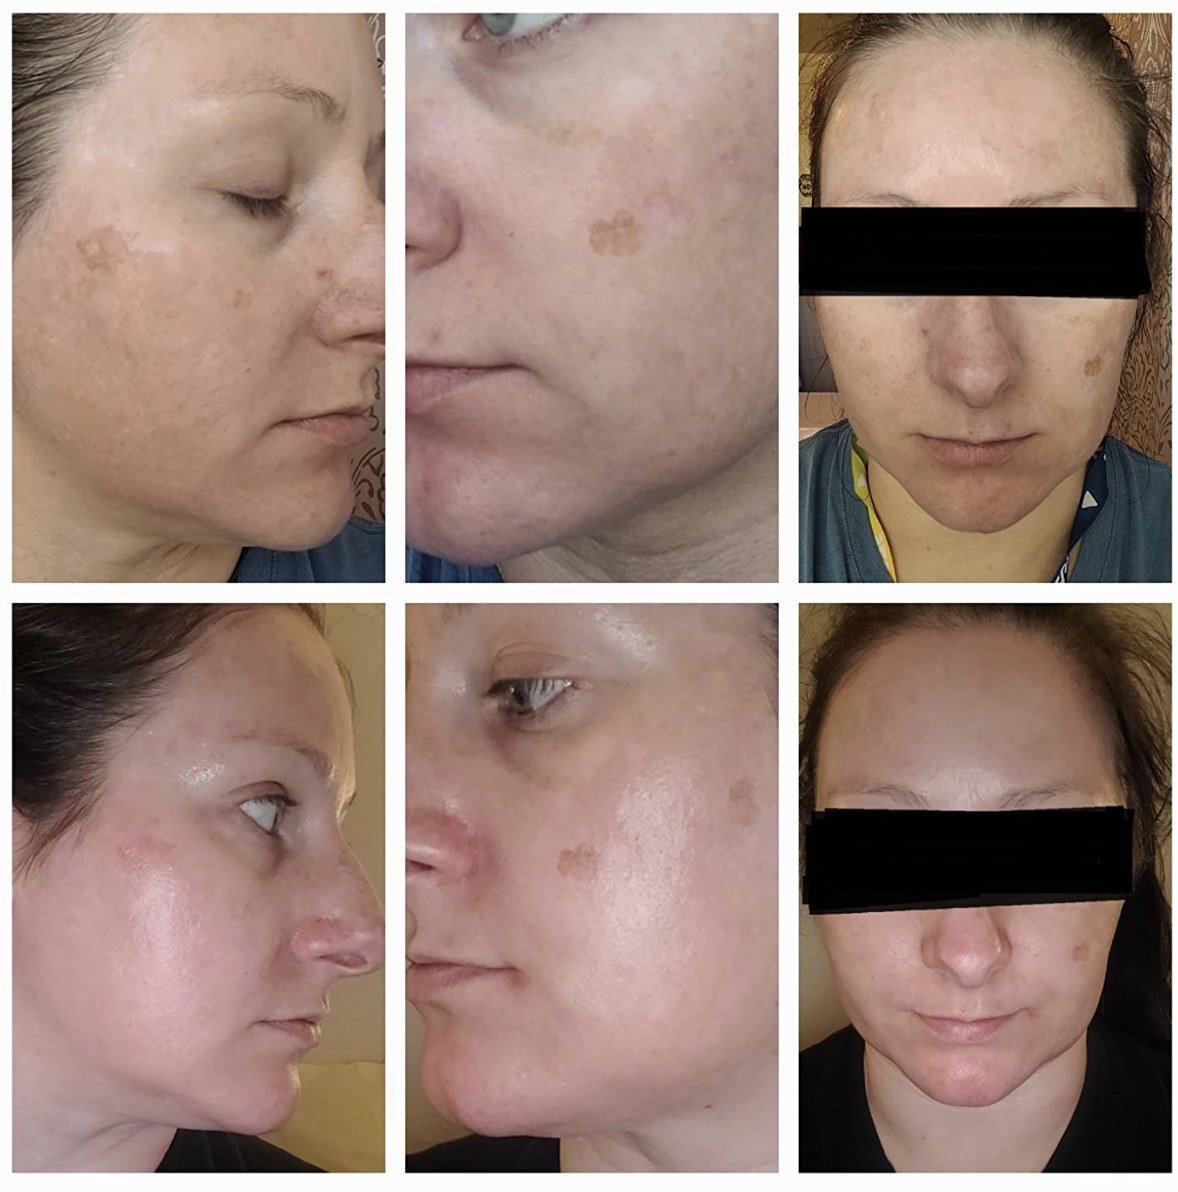 reviewer photo showing their skin before and after using the liquid exfoliant, greatly reducing their dark spots